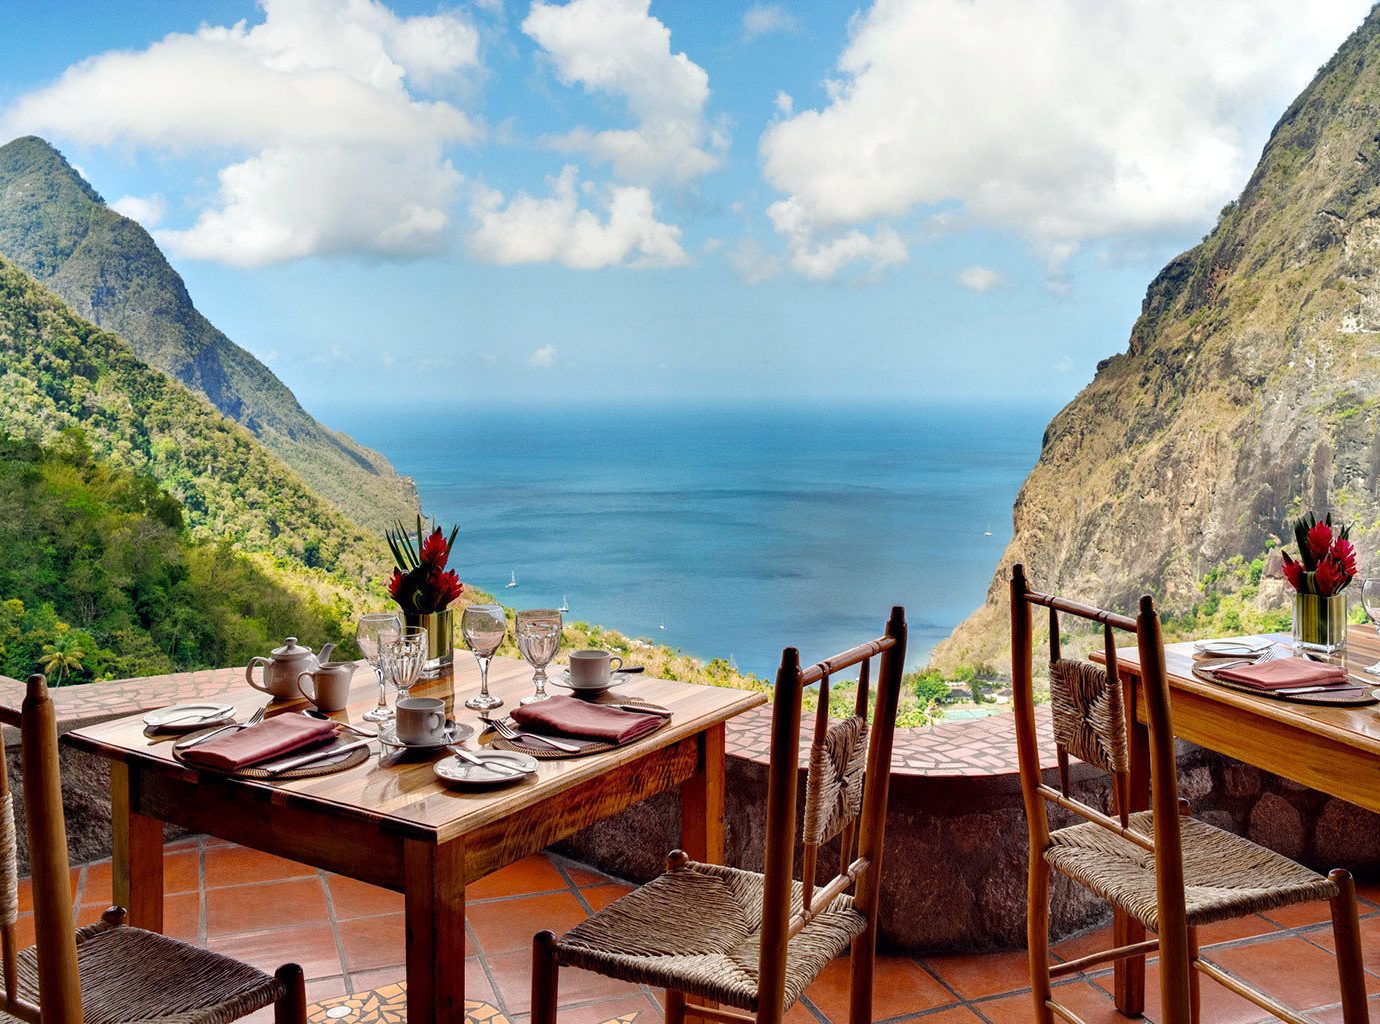 Adult-only Dining Drink Eat Food + Drink Honeymoon Hotels Luxury Luxury Travel Resort Romance Scenic views Trip Ideas mountain sky outdoor table chair leisure Nature vacation tourism Sea estate Coast travel bay overlooking set Island